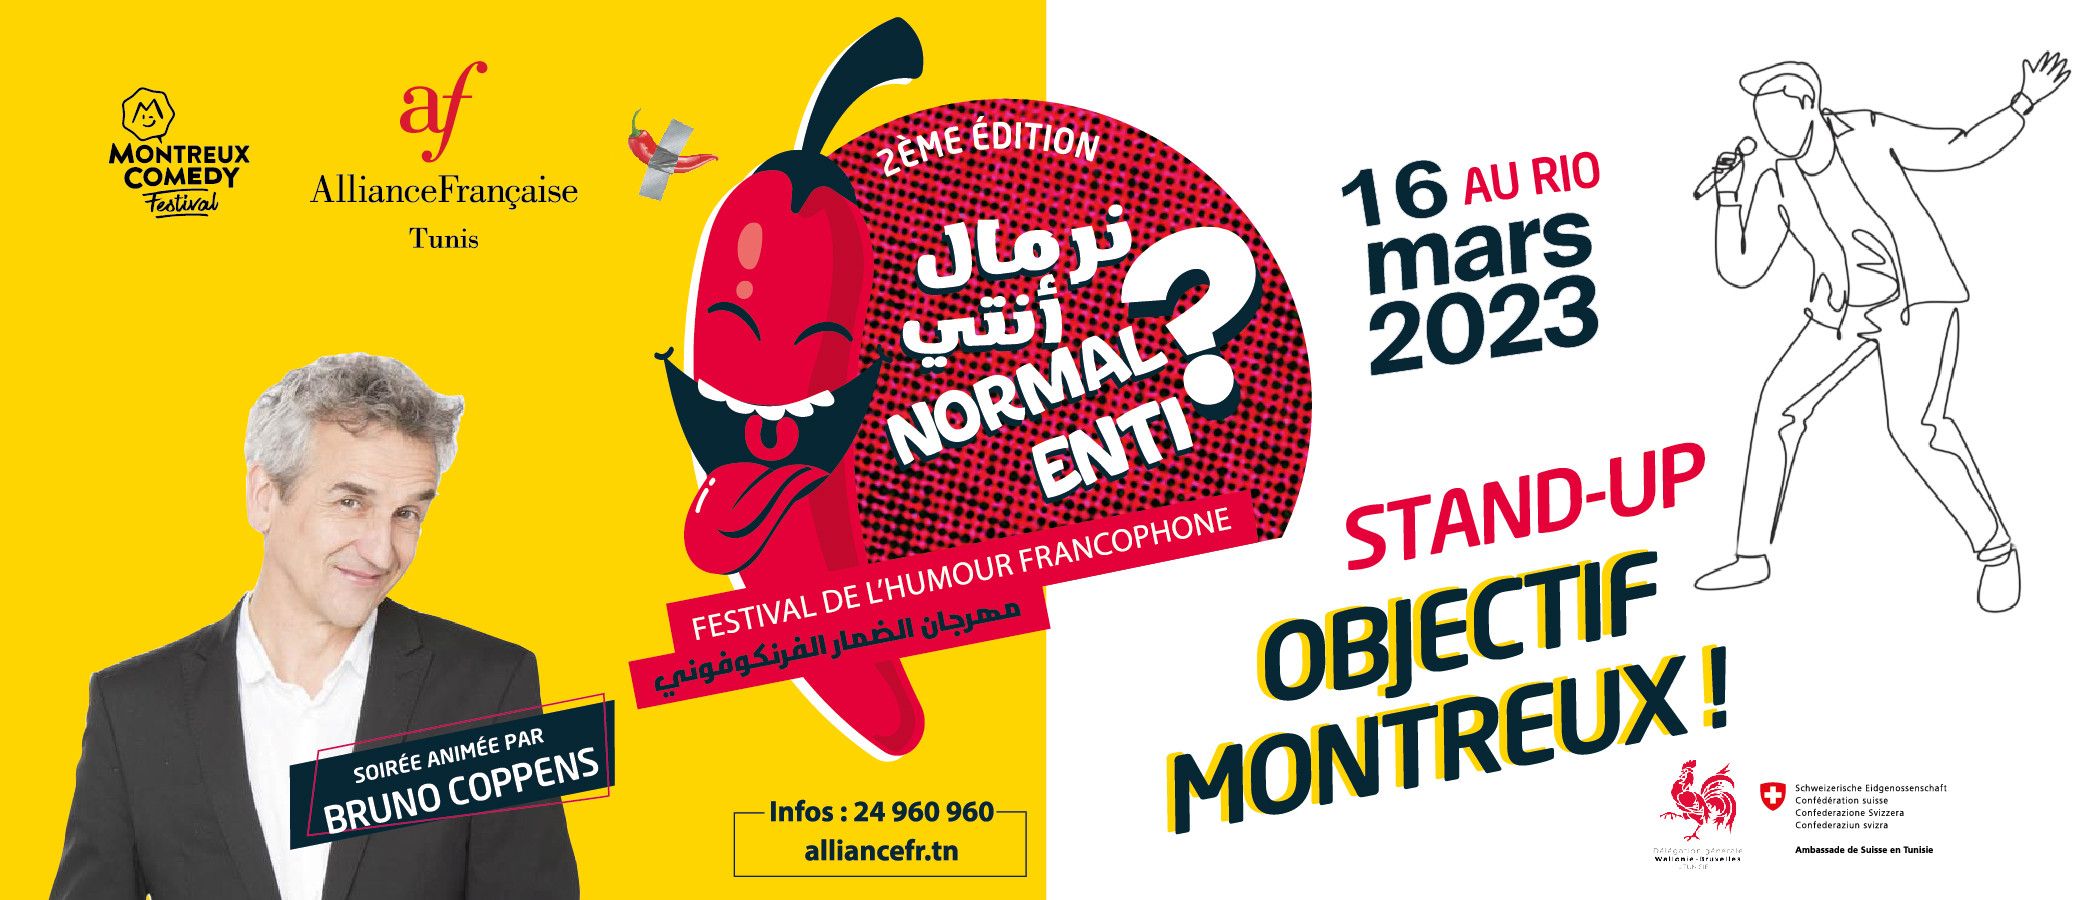 "Normal Enti ? نرمال انتي" Stand-up "Objectif Montreux"